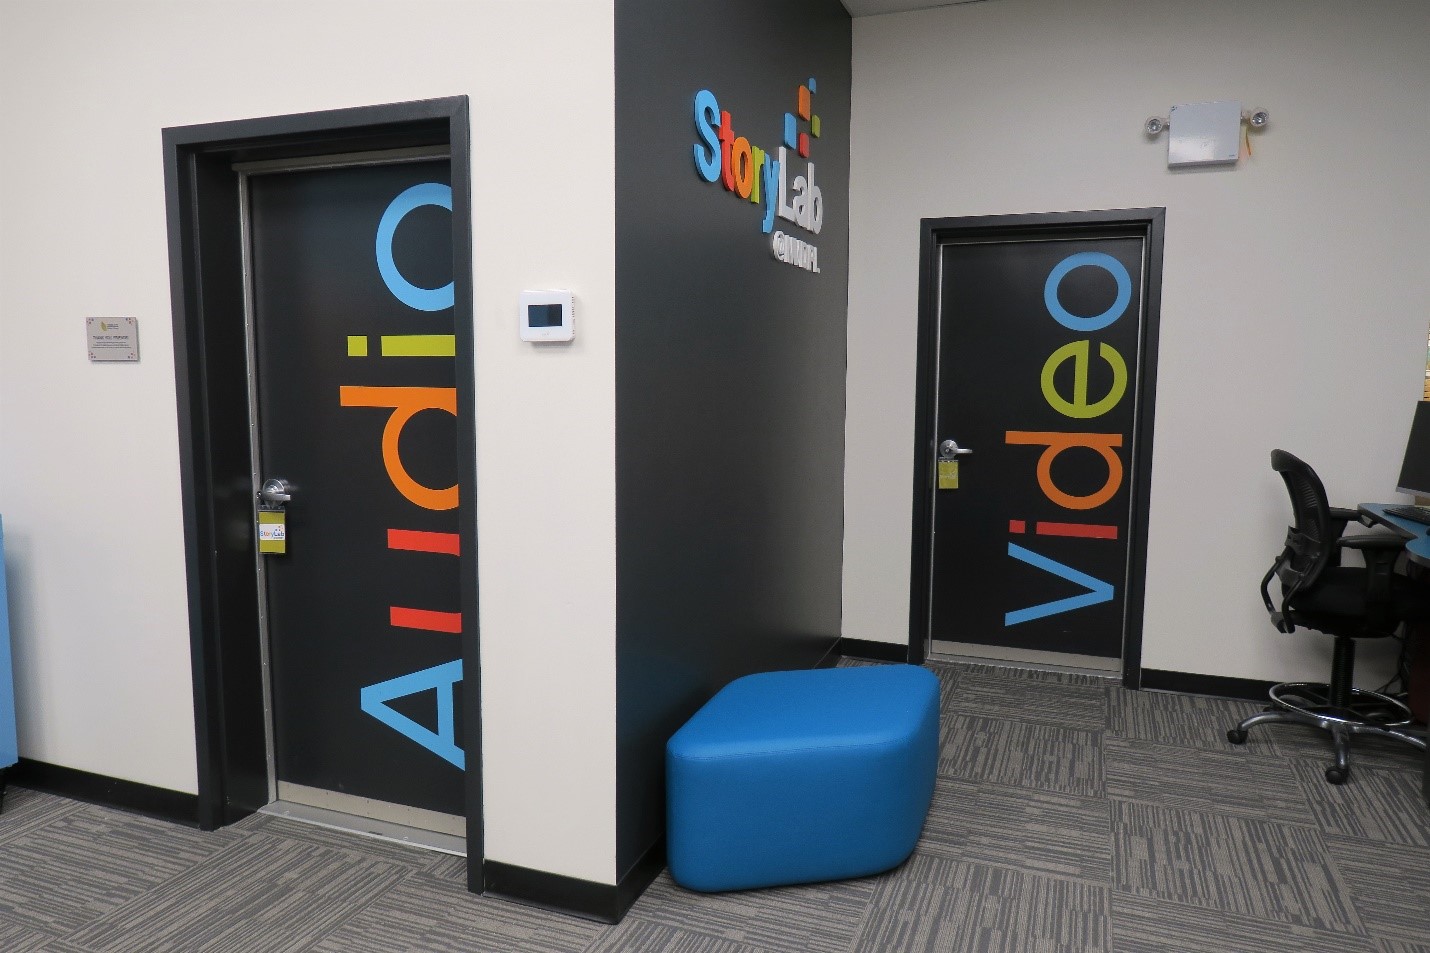 The doors to the Audio Booth and Video Studio